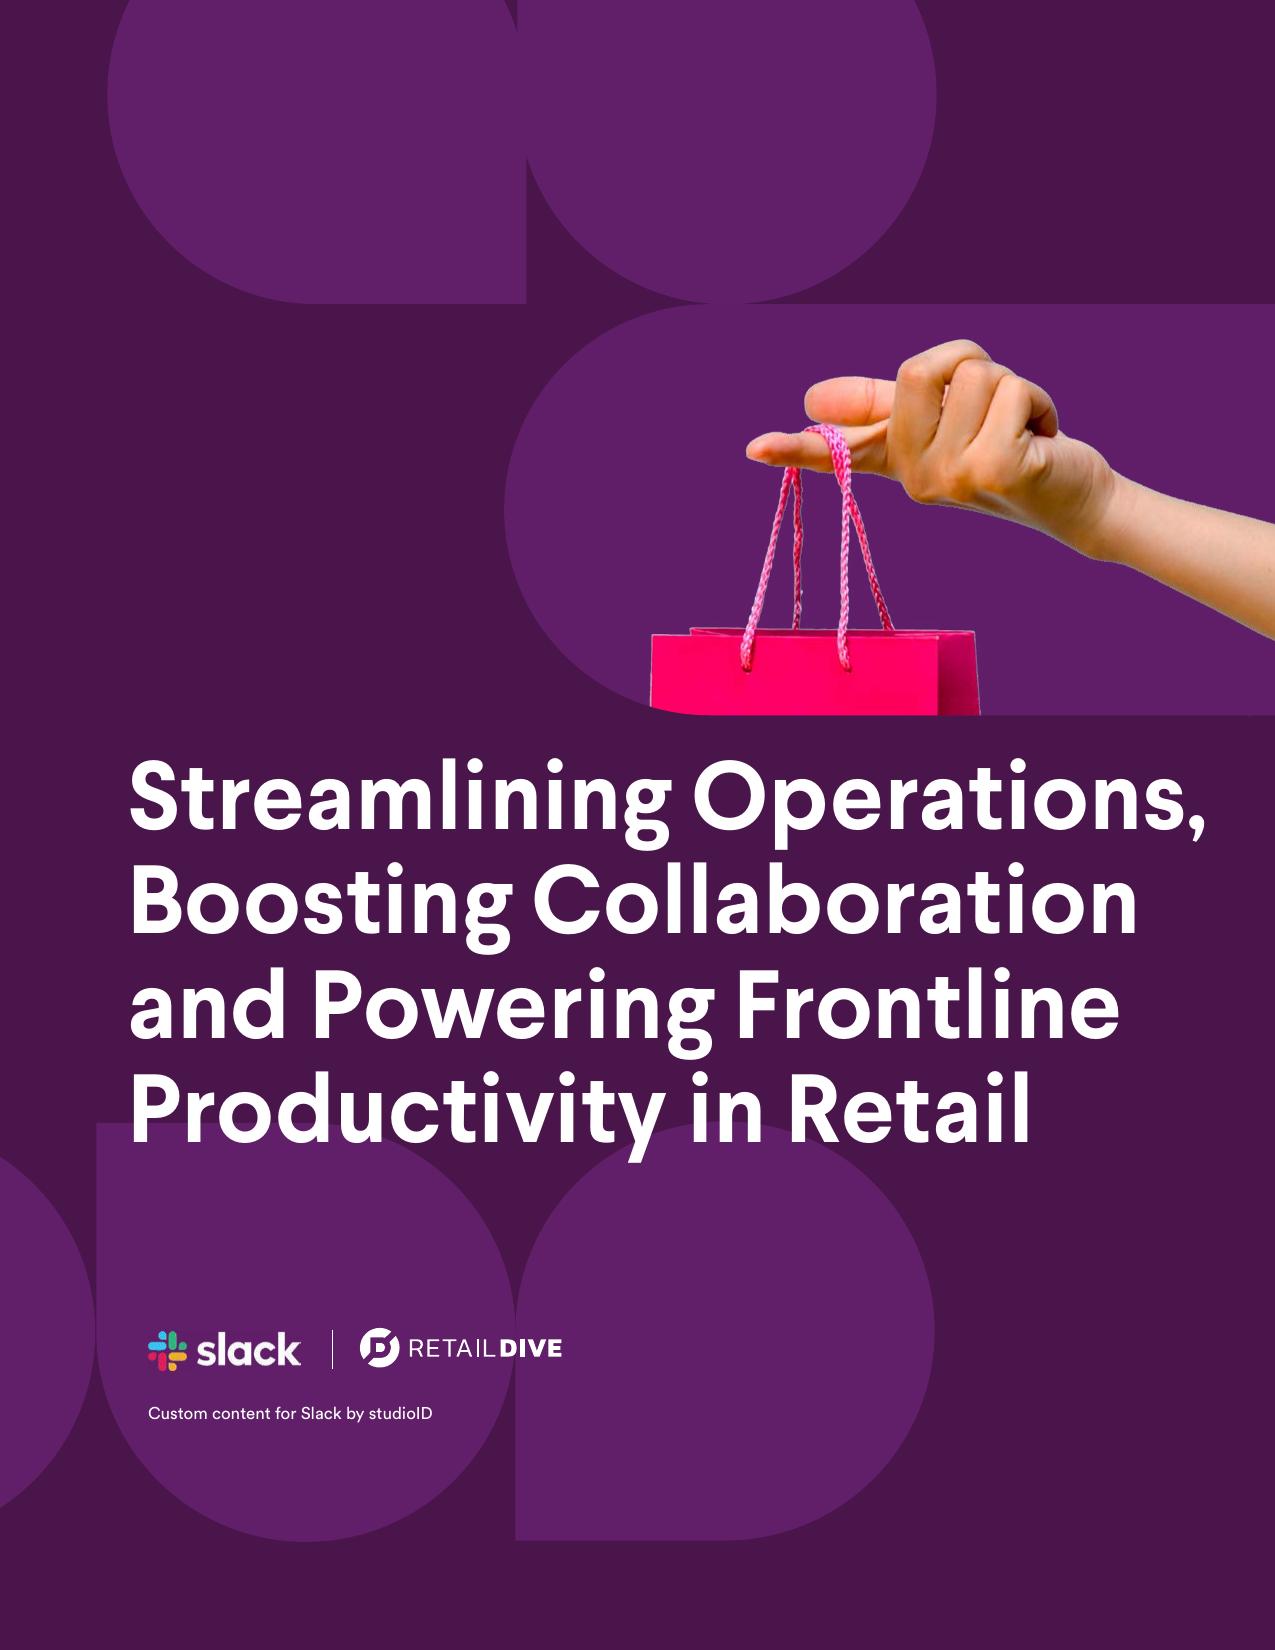 Streamlining Operations, Boosting Collaboration, and Powering Frontline Productivity in Retail